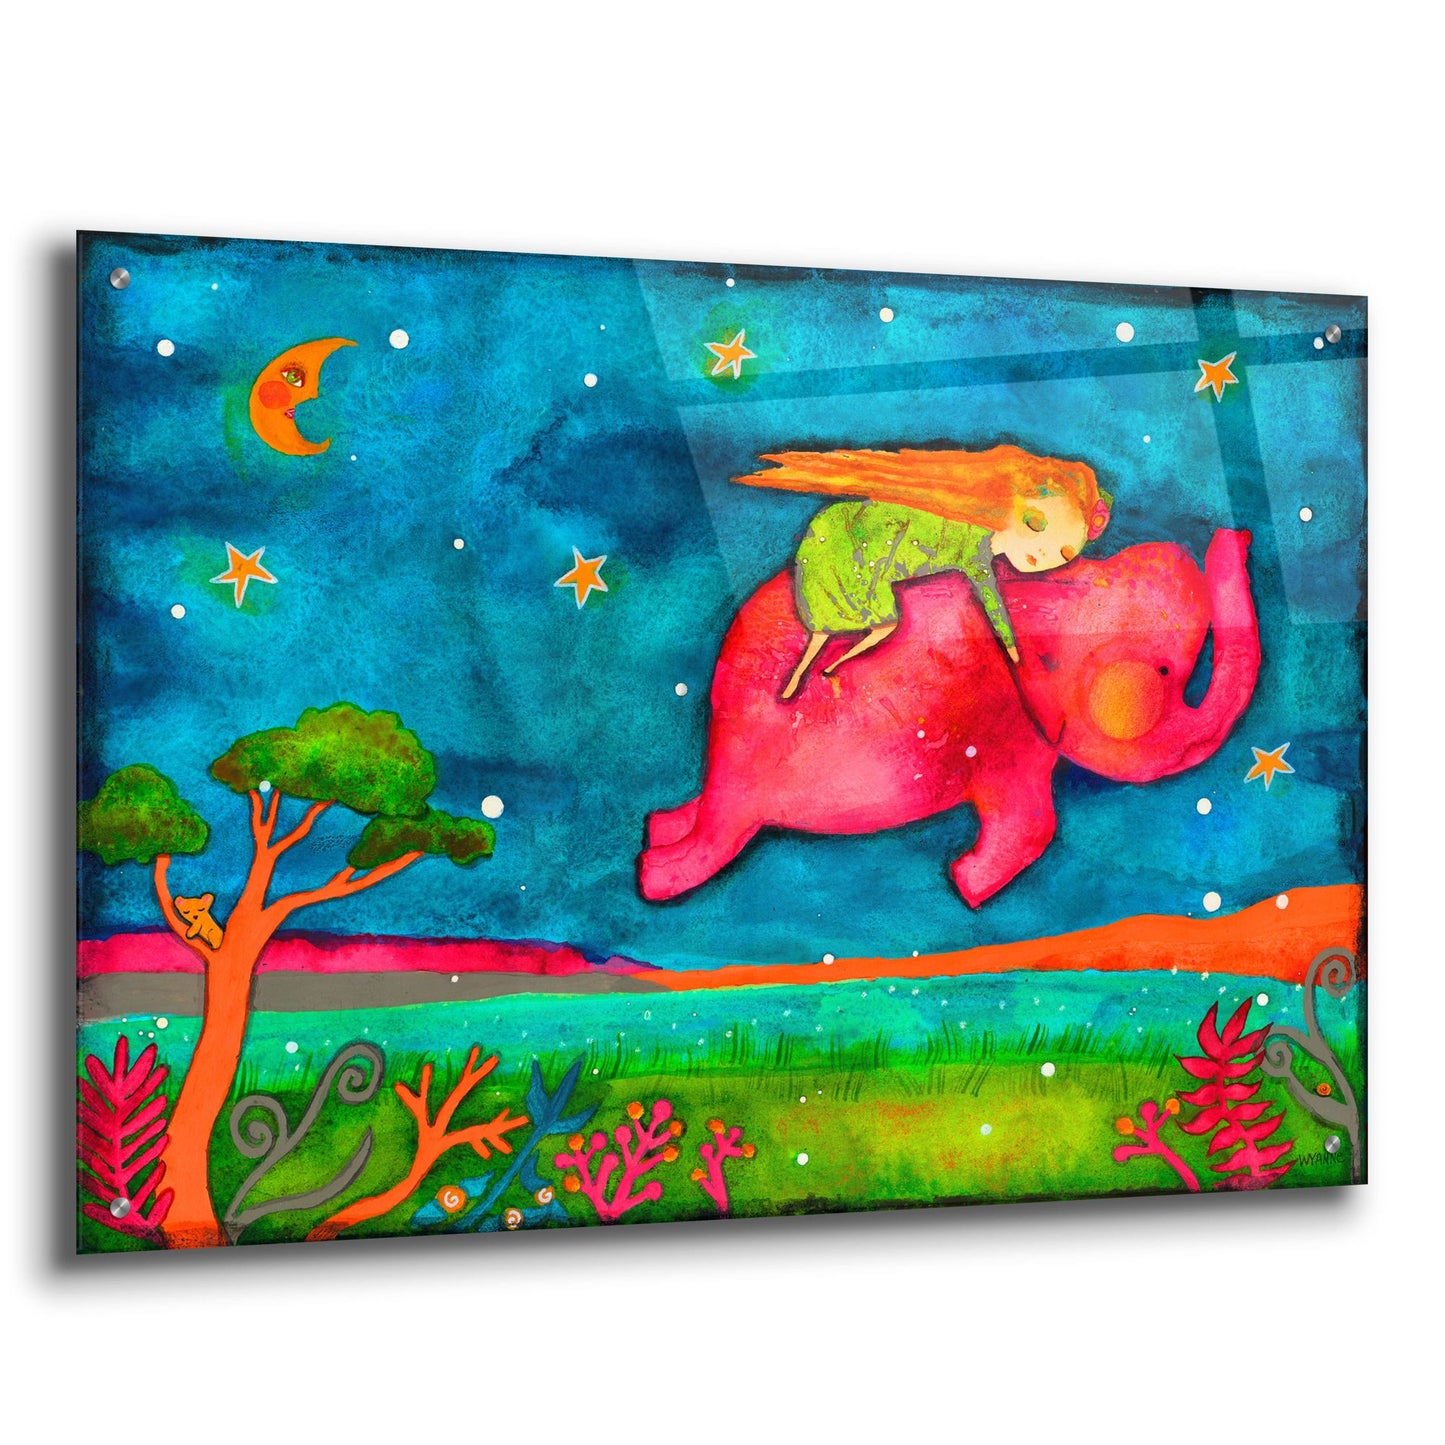 Epic Art 'Come Dream With Me' by Wyanne, Acrylic Glass Wall Art,36x24